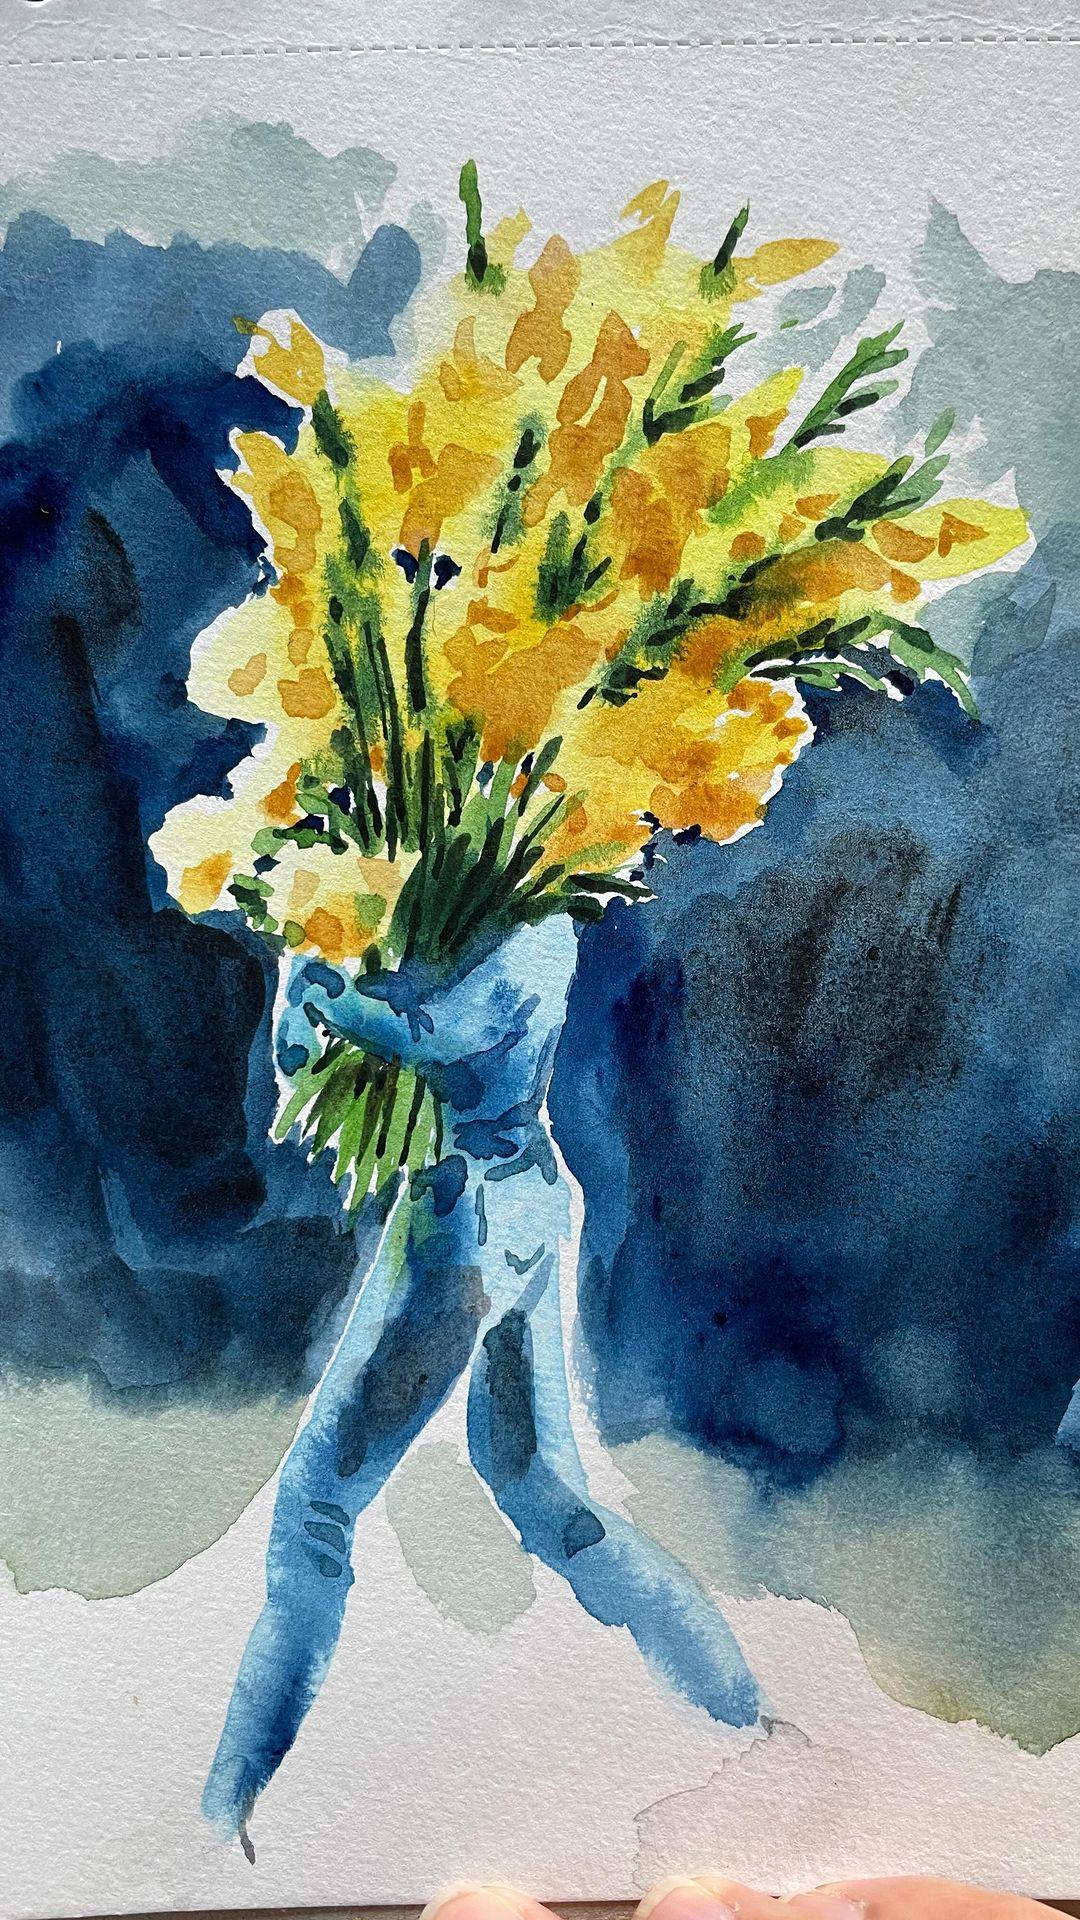 class="content__text"
 A quick watercolor sketch inspired by @carlacoulson photography 💐 
.
.
.
 #flowerloversofinstagram #watercolorsketchbook #yellowflowers🌼 #parisianvibe #illustratingbeauty #quicksketchartist #walktosee #fashionillustrationsketch 
 